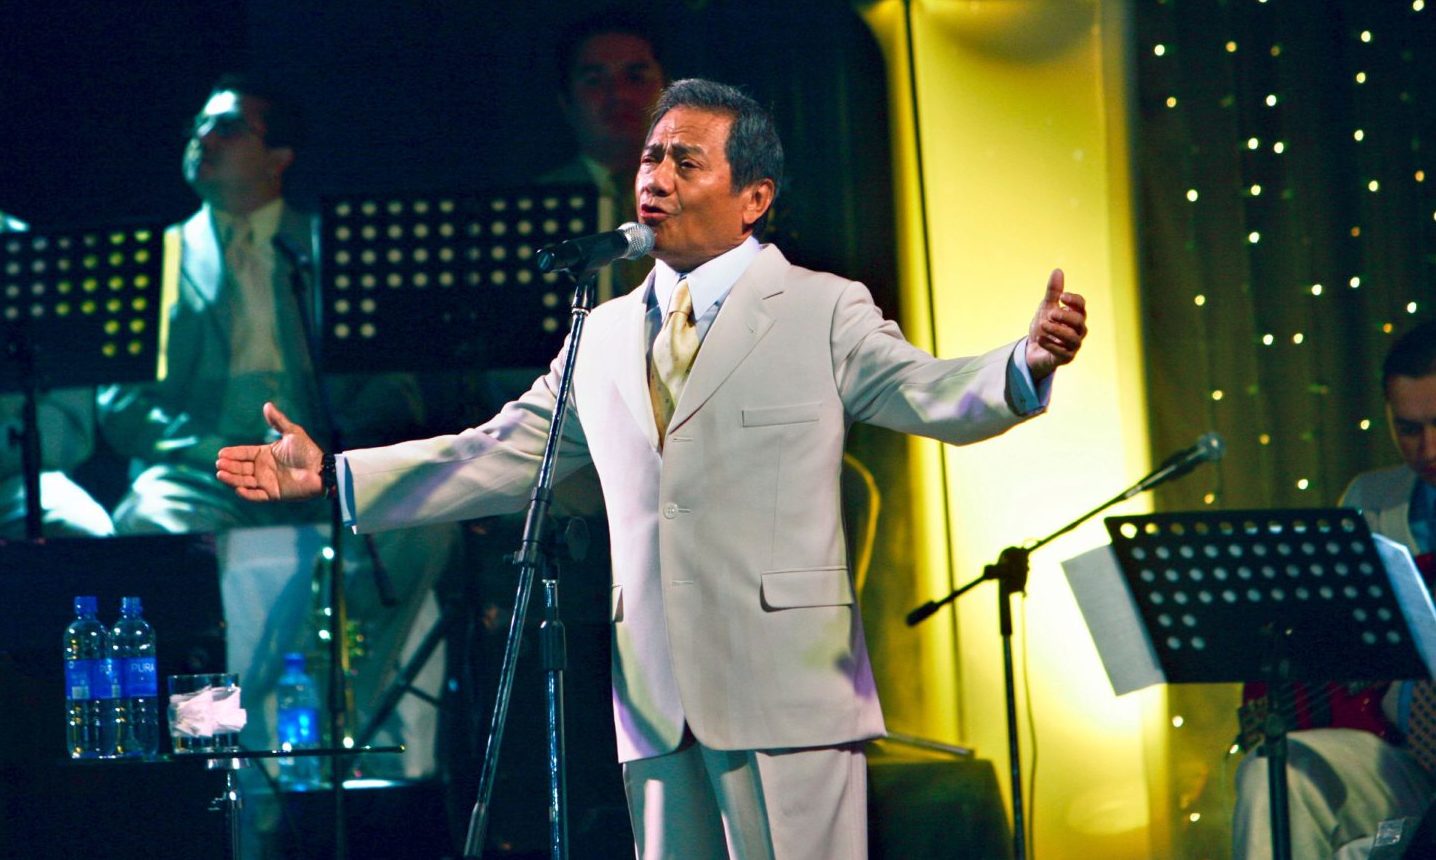 Mexican singer and songwriter Armando Manzanero performs in Managua, Nicaragua, in 2006.